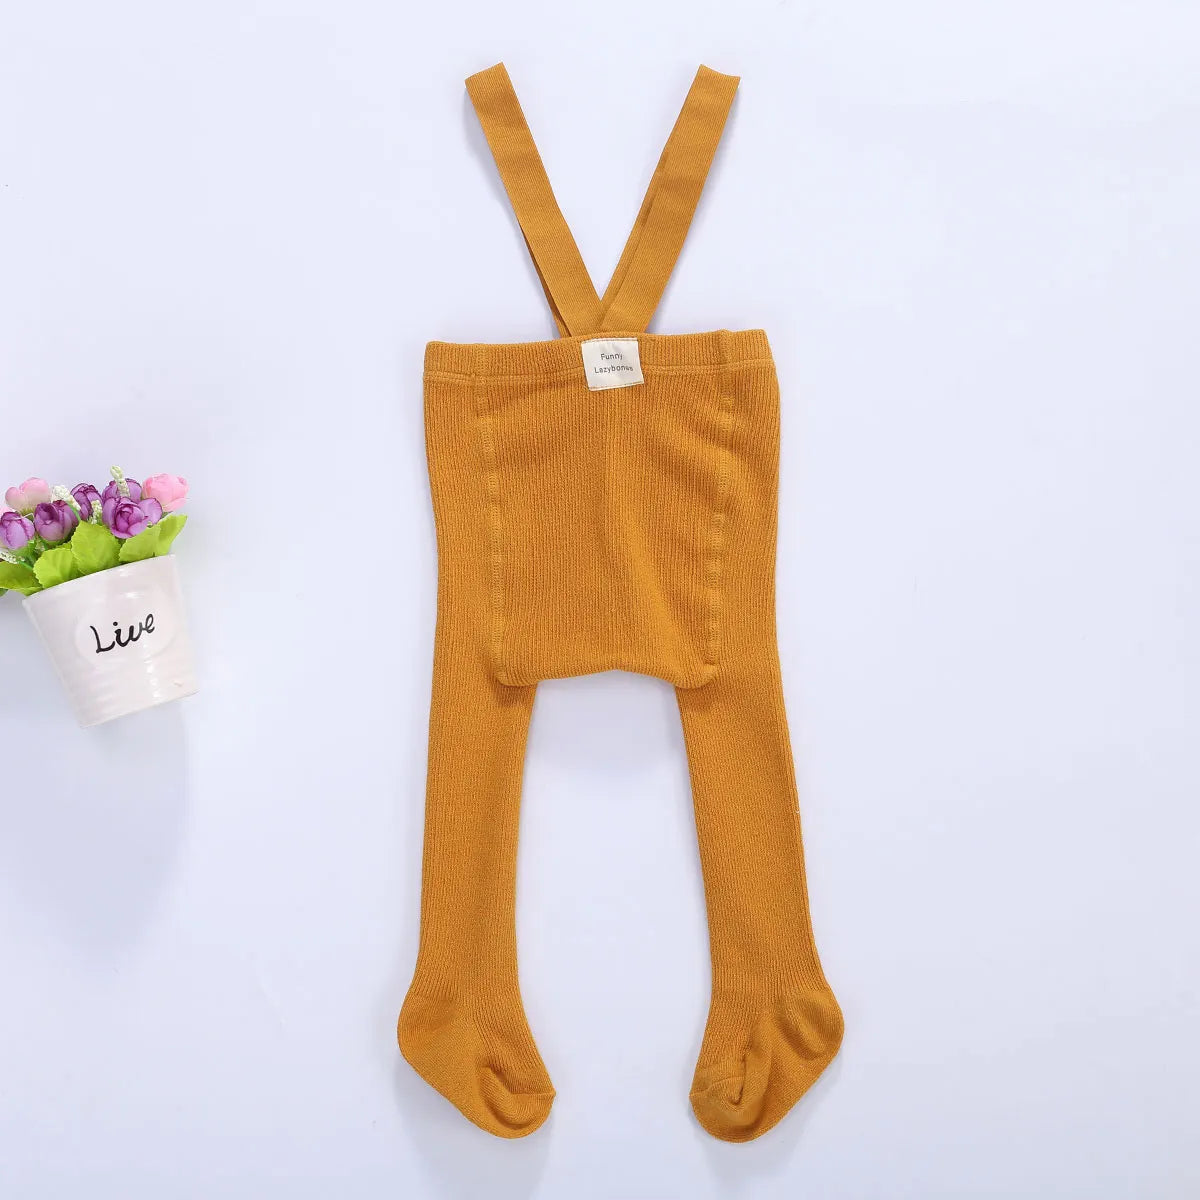 Infant Toddler Suspender Tights Pantyhose - Solid High Waist Overall Legging for Baby Girl Boy (0-24M)